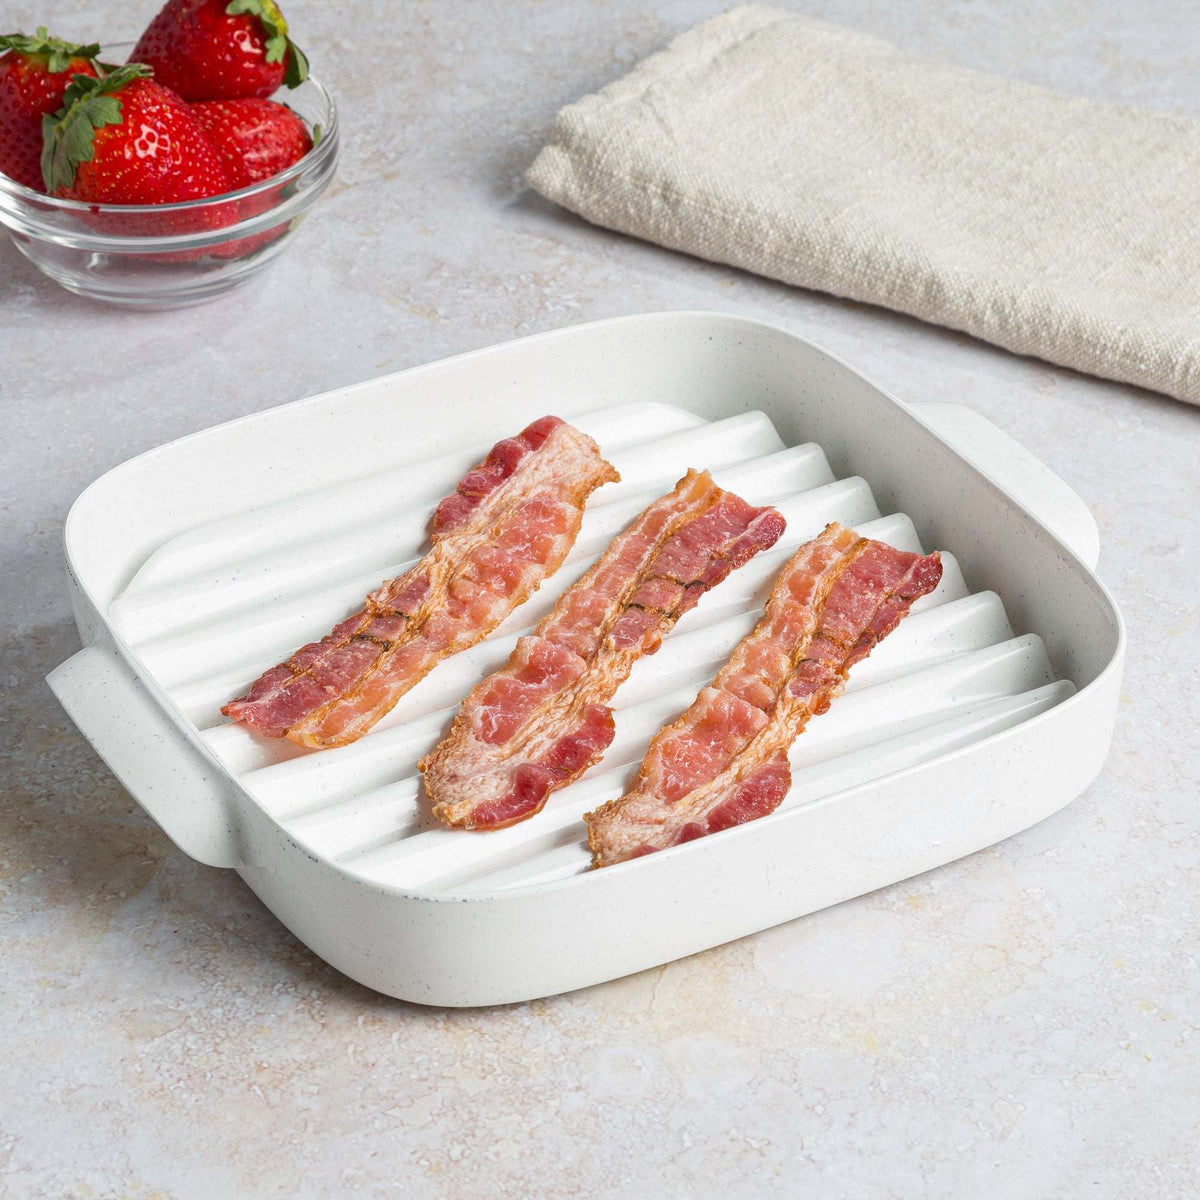 Microwavable Oven Bacon Rack Cooker Tray Cook Bar Crisp Breakfast Meal Home  Dorm